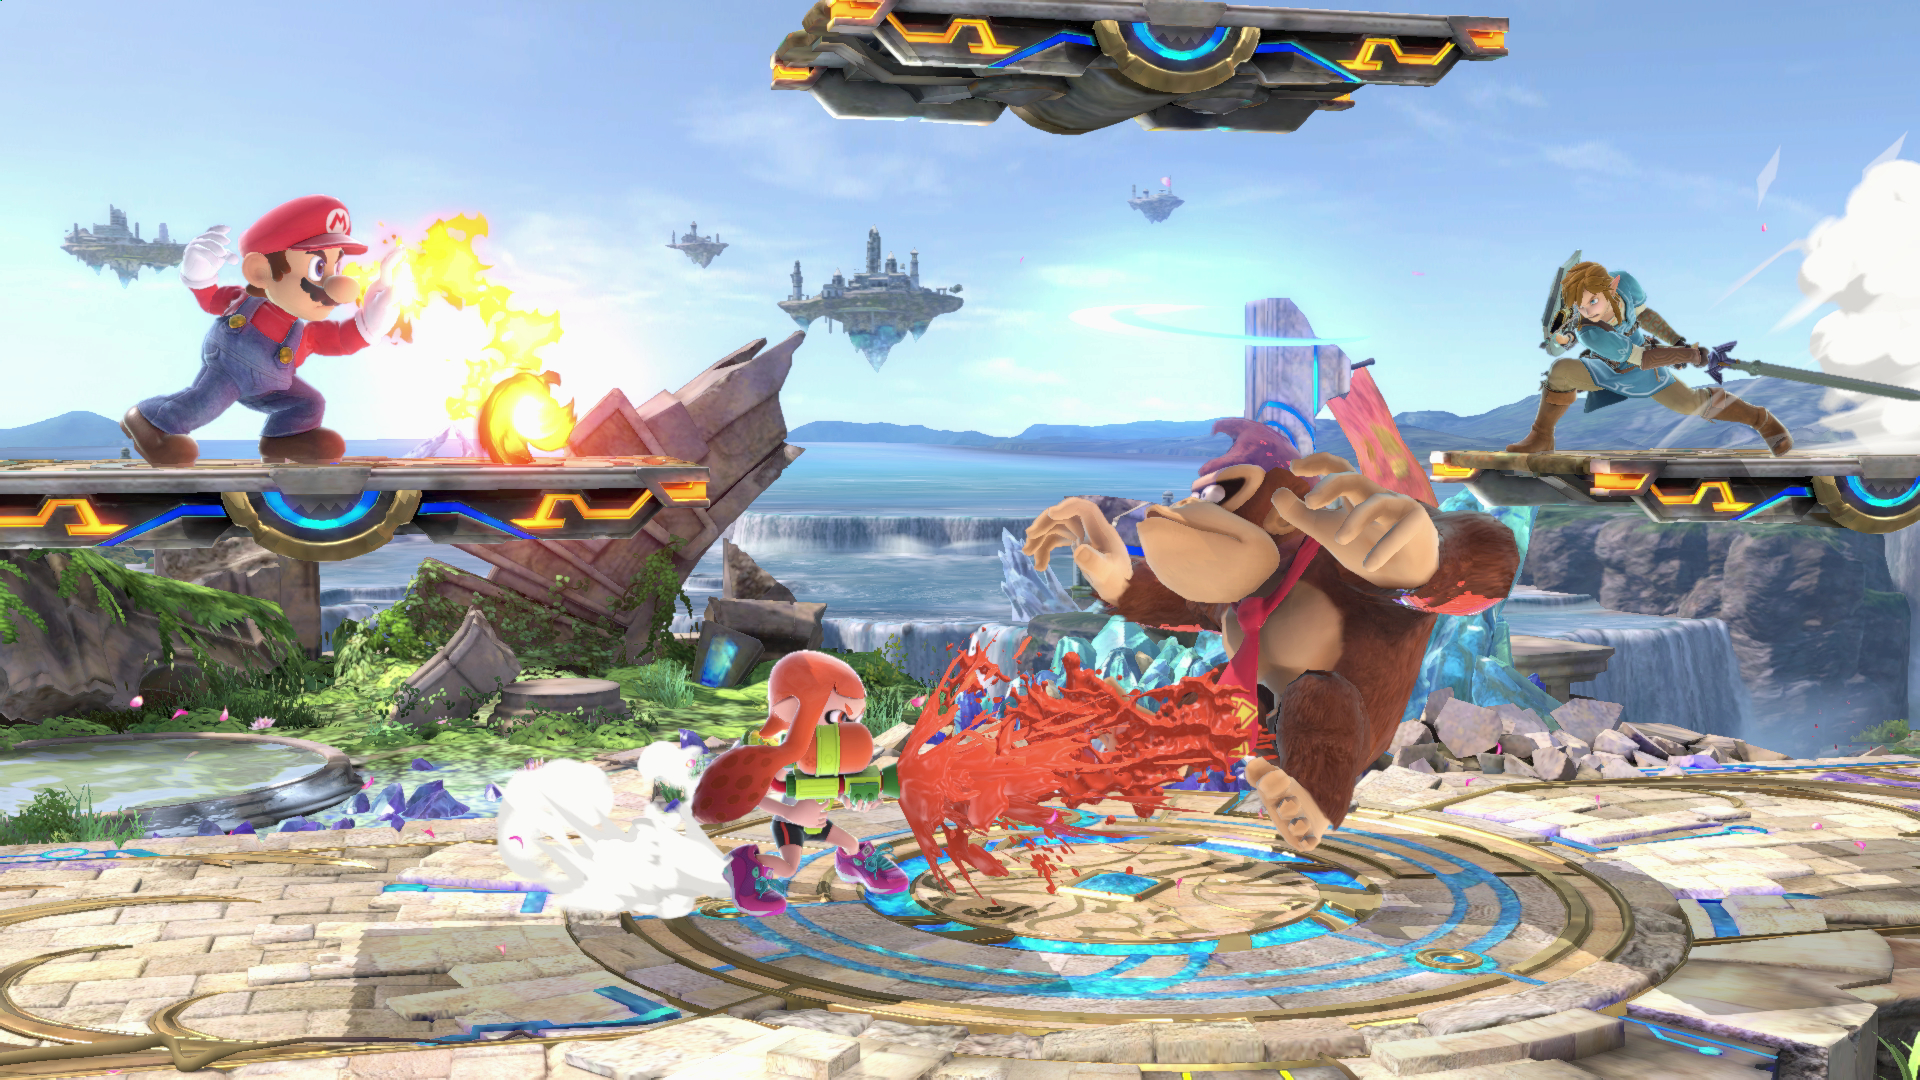 Super Smash Bros. Ultimate: Beginner's Guide to Fighting